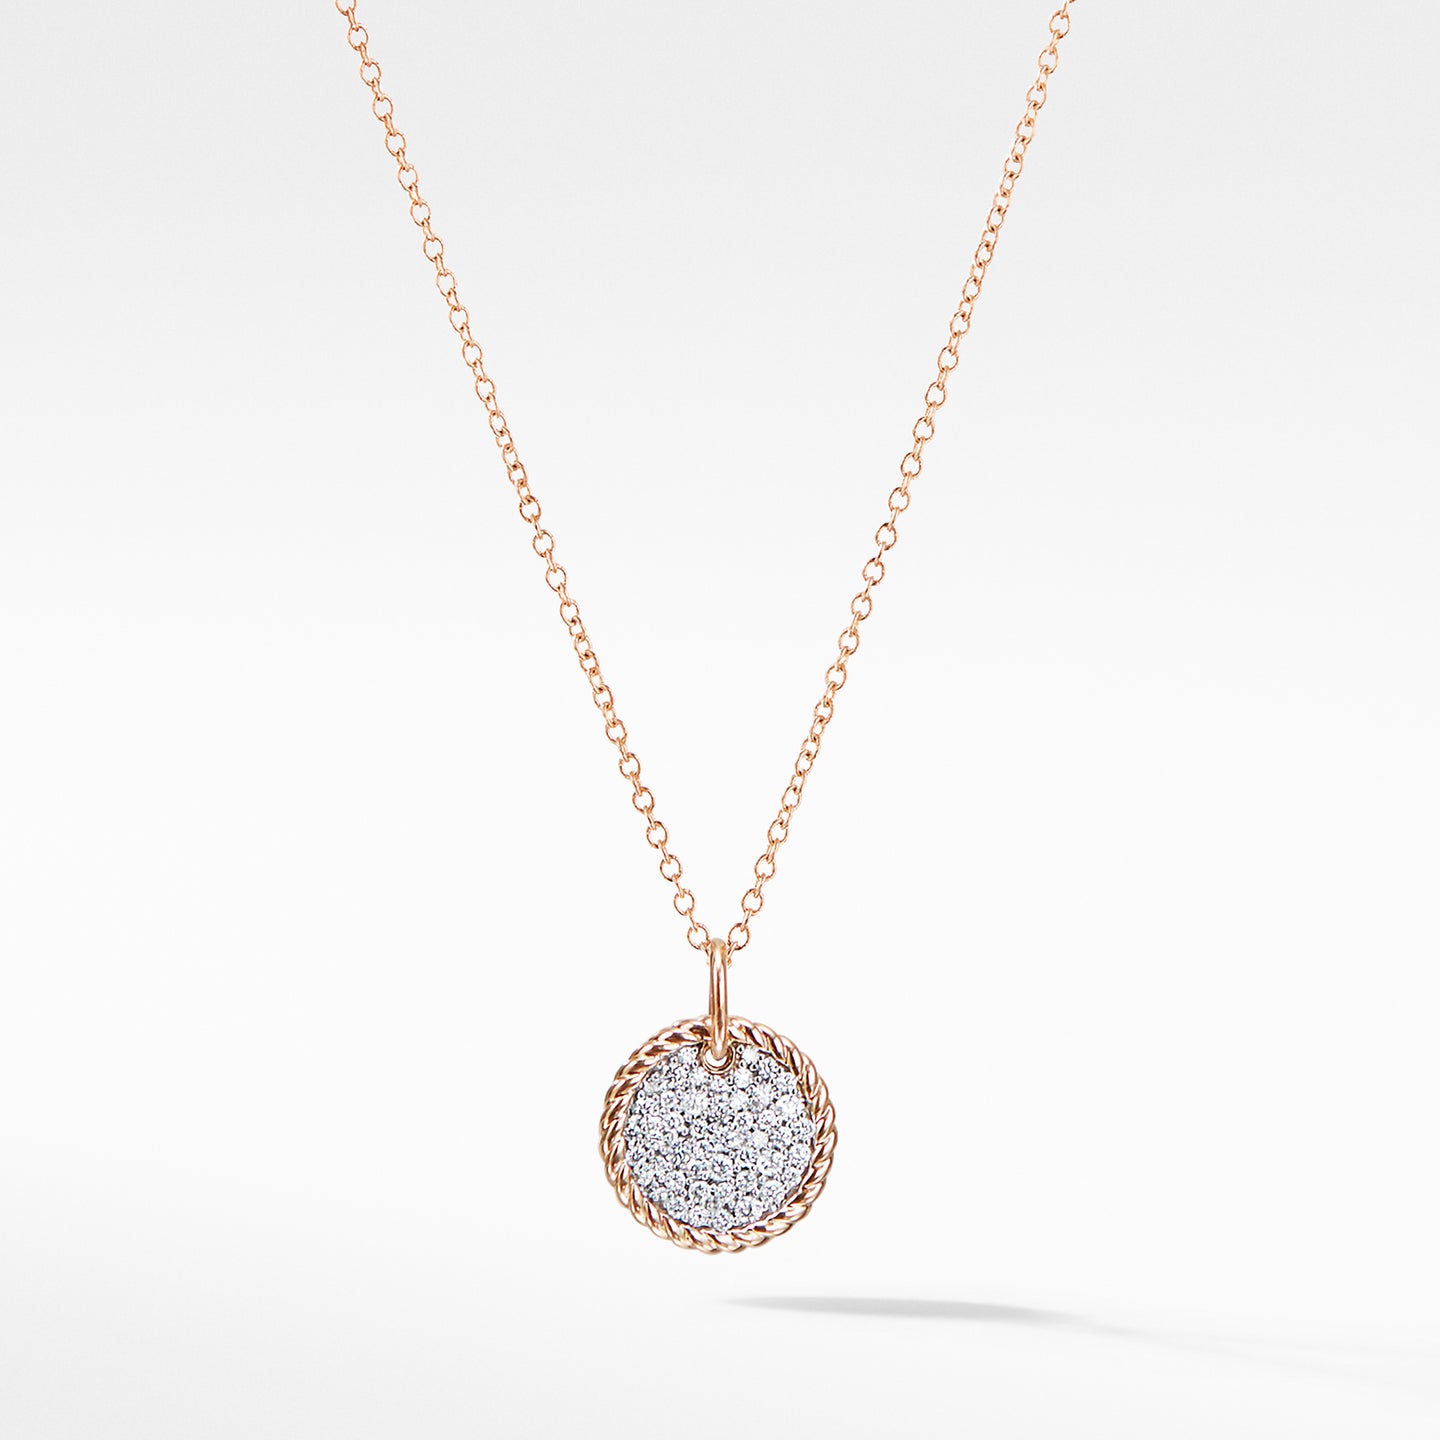 Necklace with Diamonds in 18K Rose Gold, 18